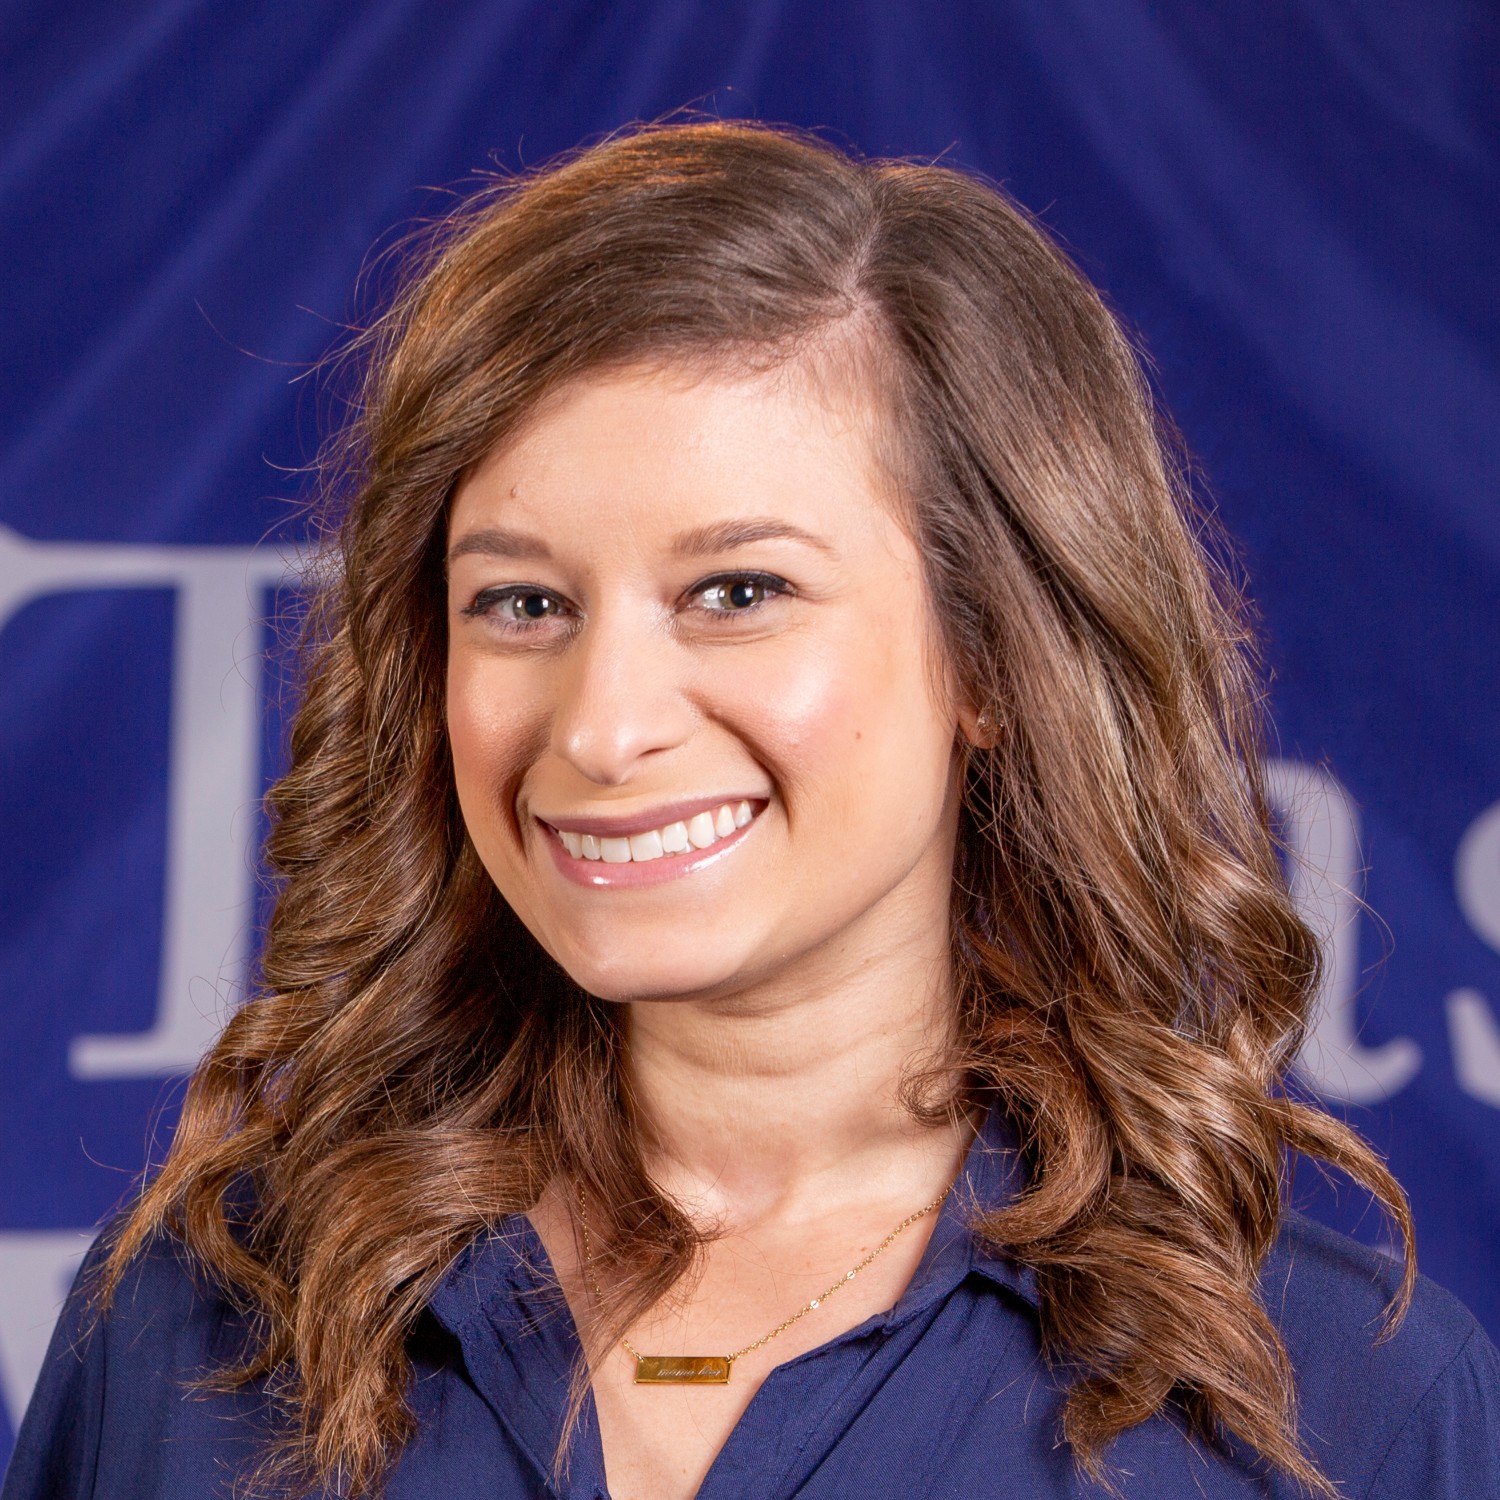 Photo of Megan Lawless, executive assistant to the vice president of enrollment, marketing and communications